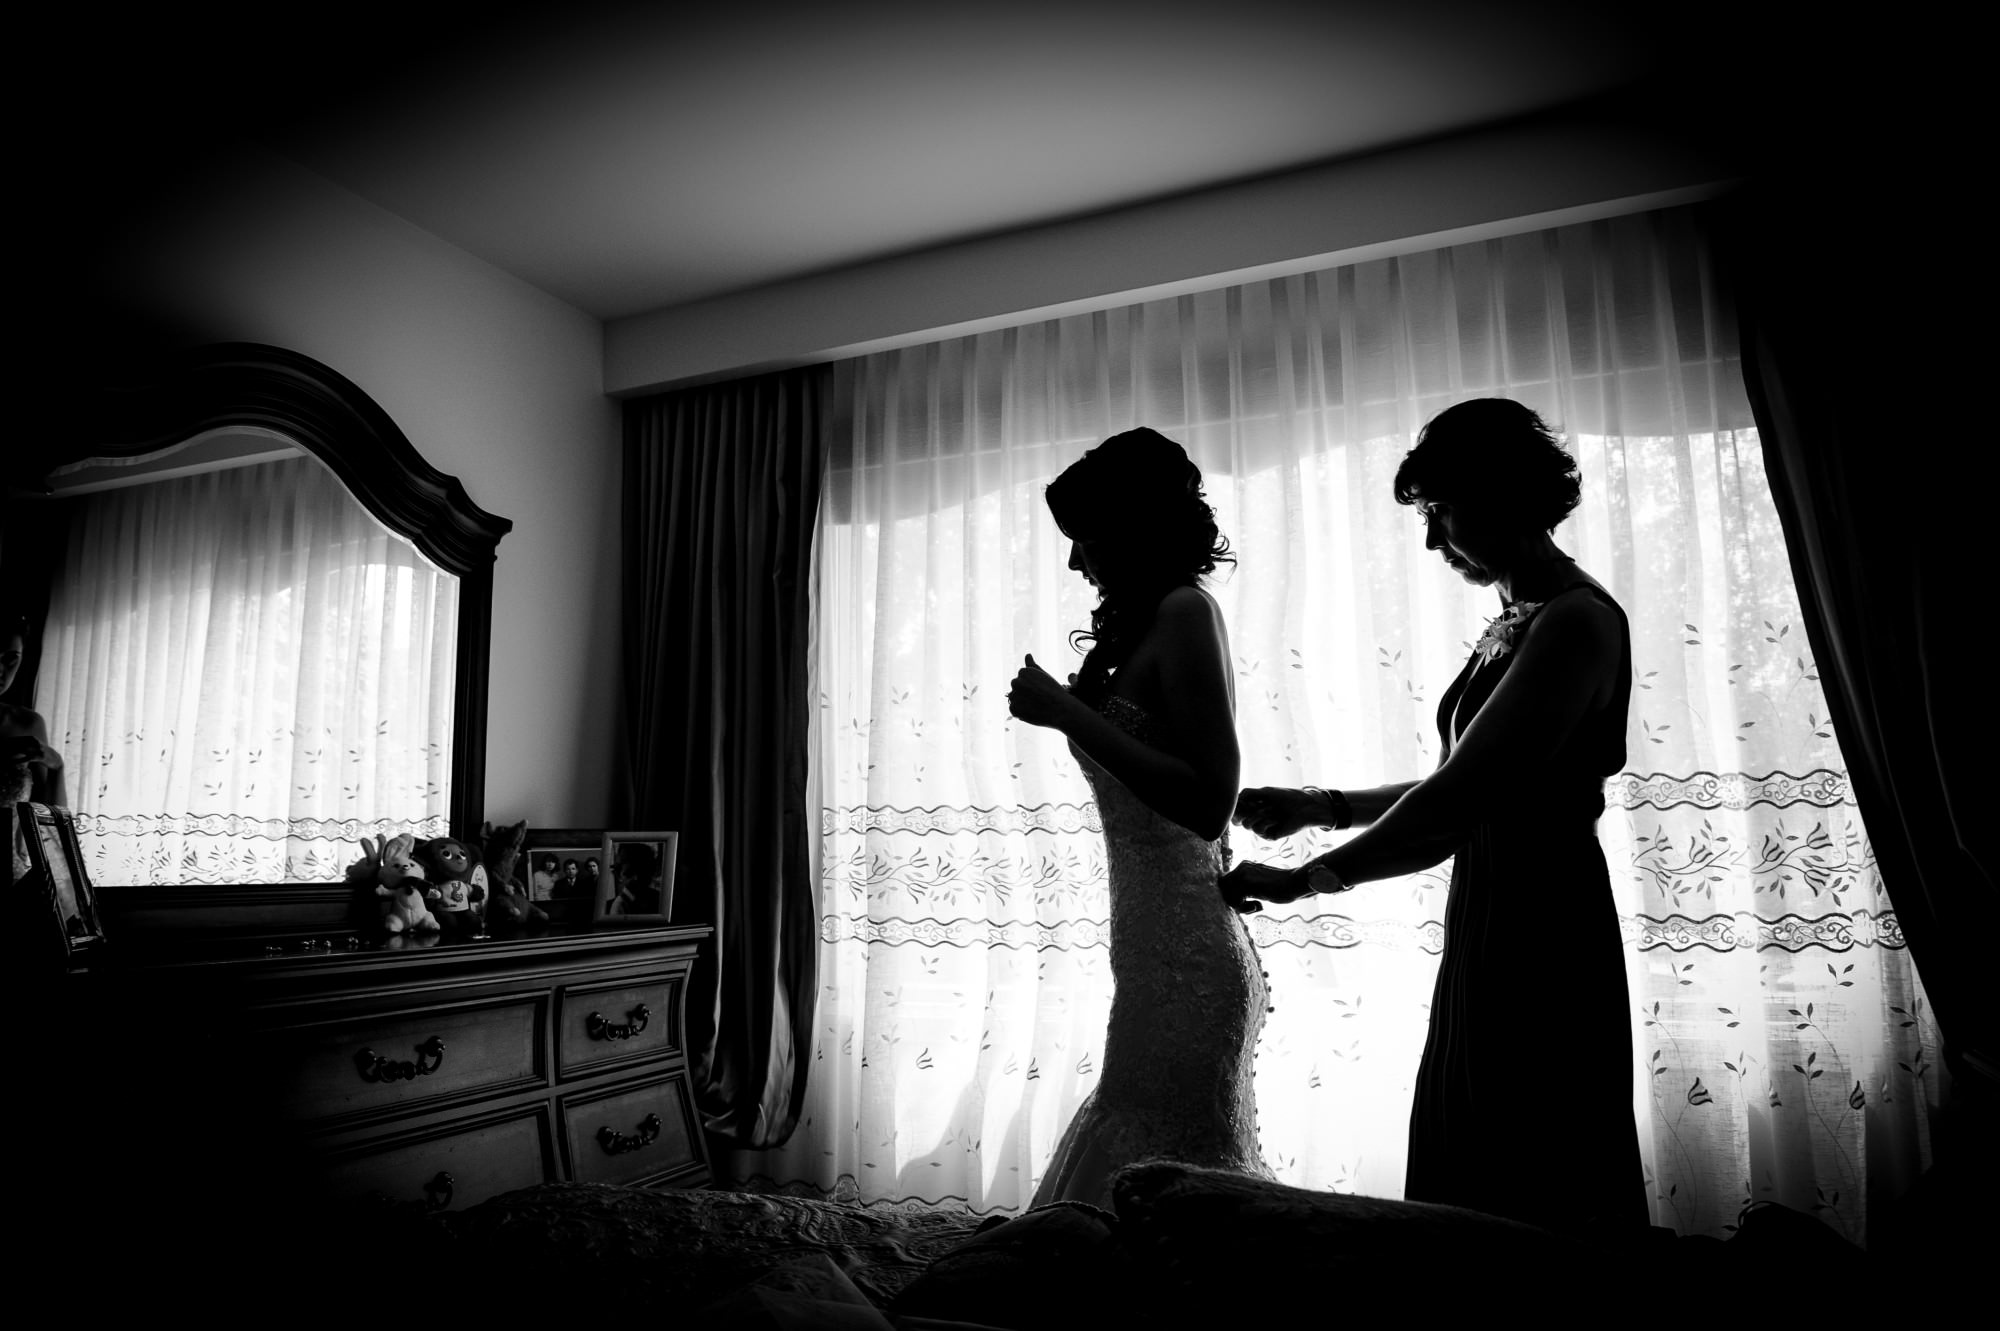 lavimage wedding photography montreal 5 ways to keep calm on your wedding day have fun on your wedding every bride must know canadian wedding weddingbells